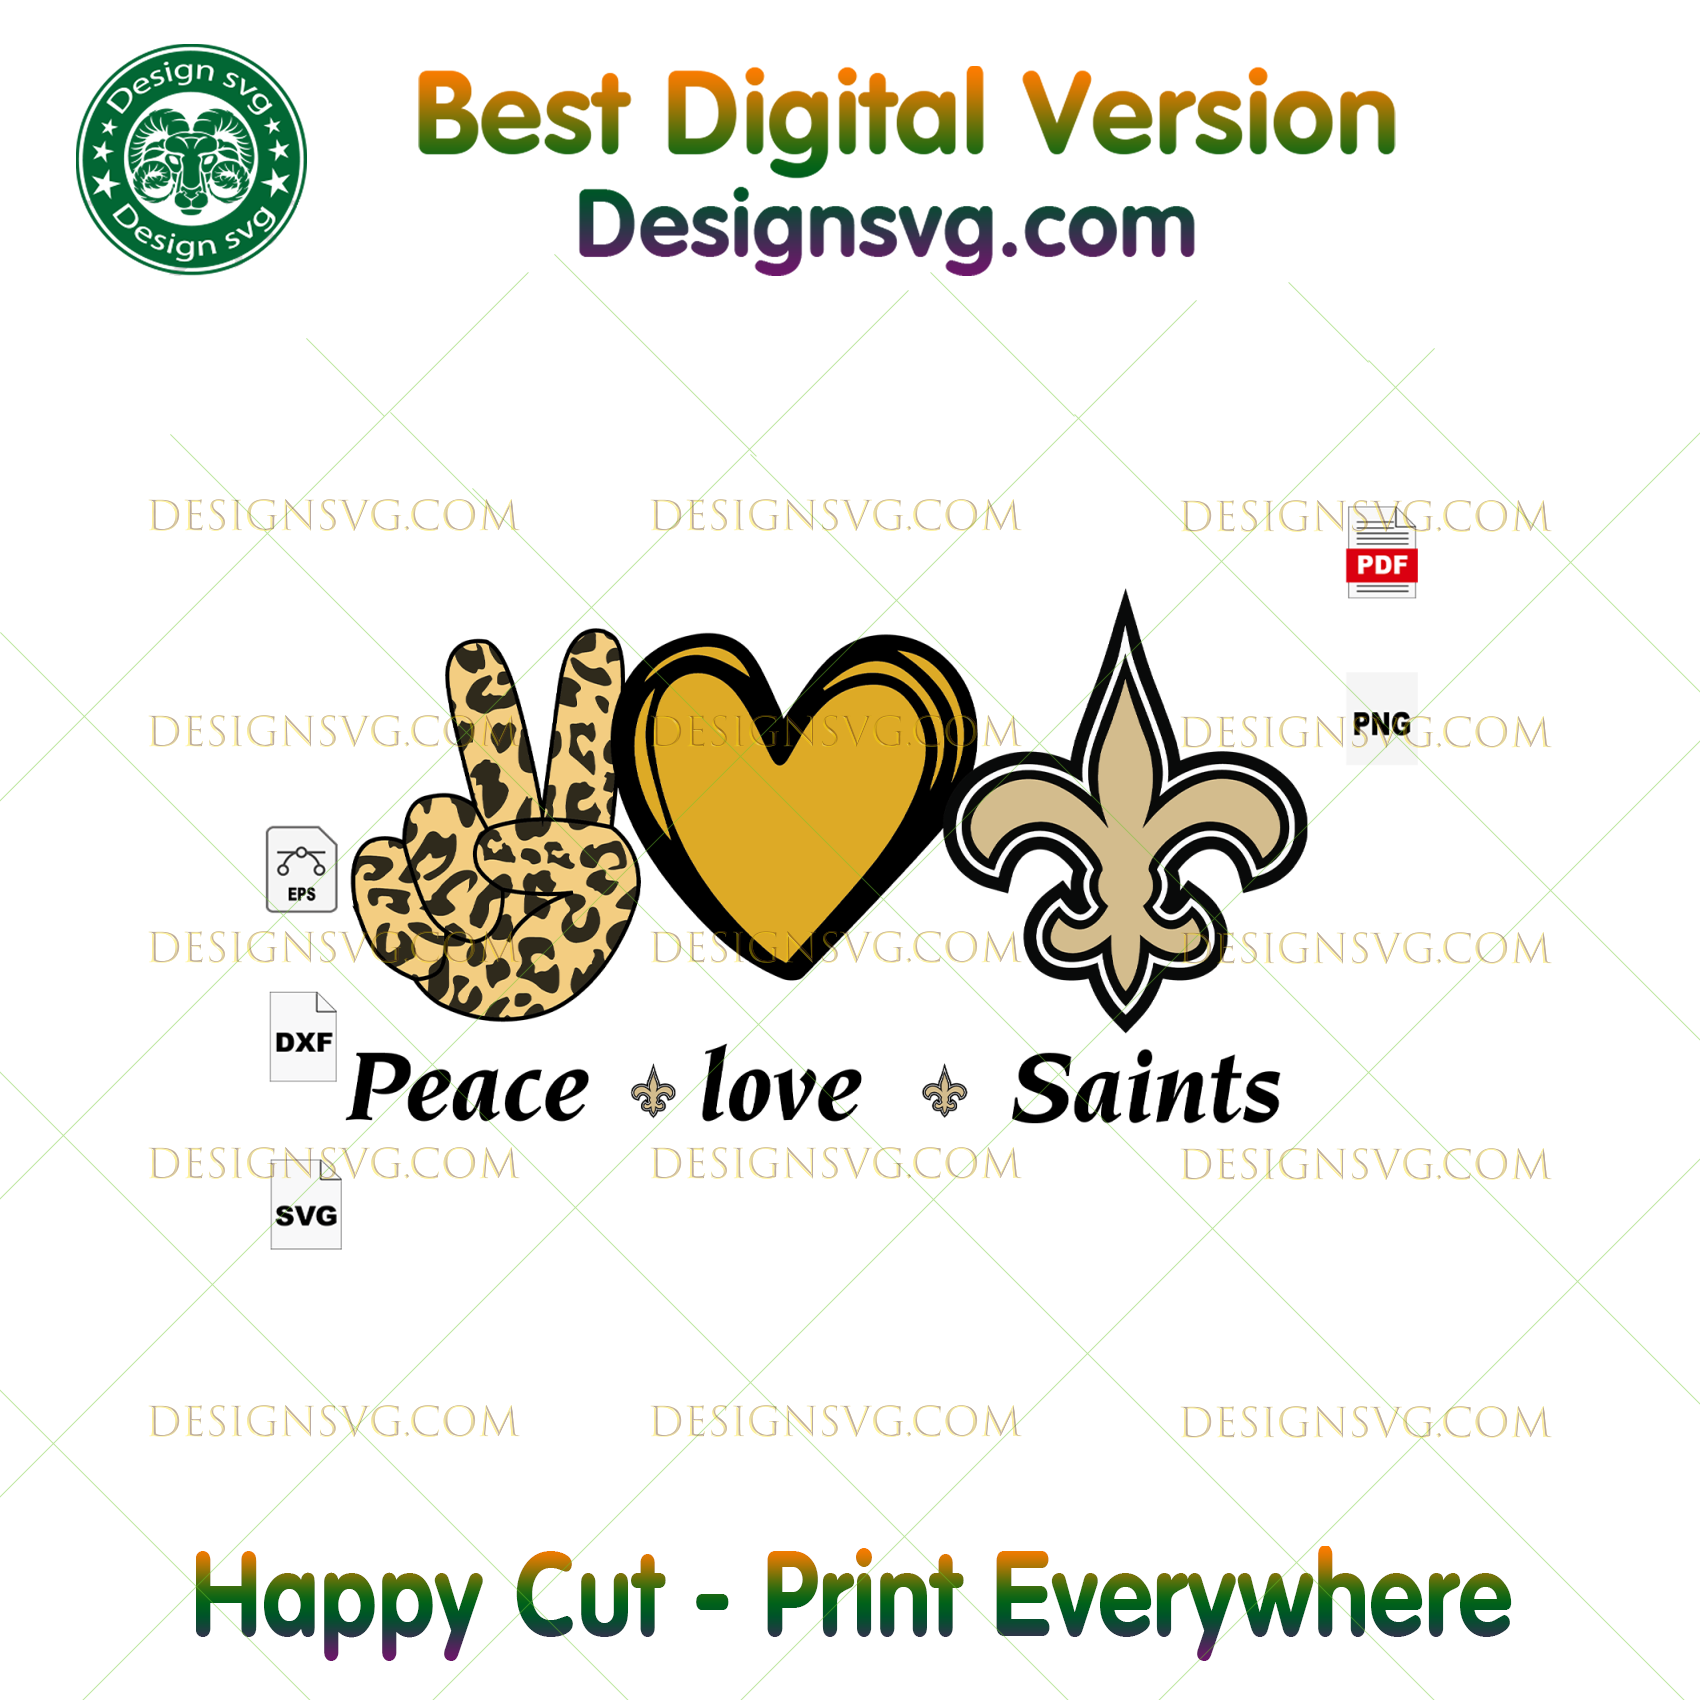 Download Peace Love Svg Make Fun Diys Shirts Home Decor Cards Scraobook Pages And More From Our Library Of Free Svg Files PSD Mockup Templates